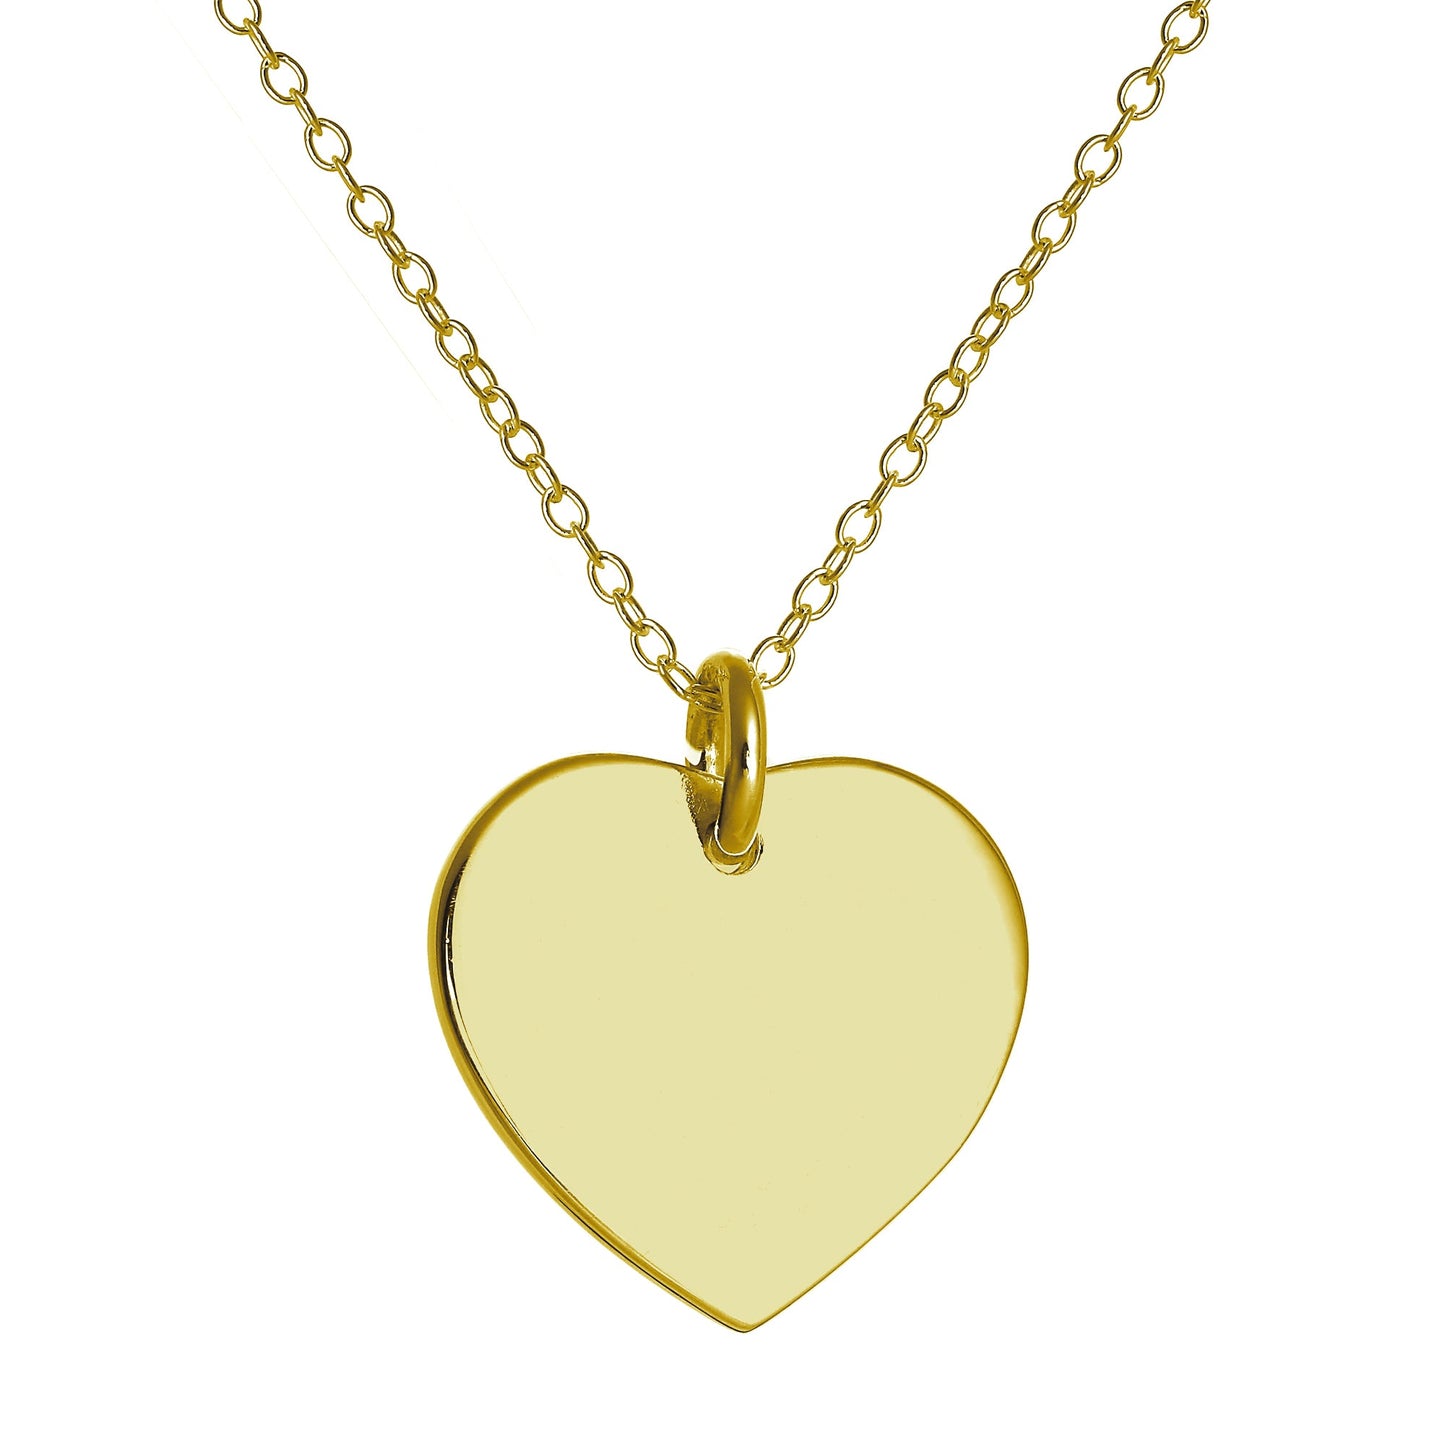 Gold Plated Sterling Silver Engravable Heart Necklace 16 22"